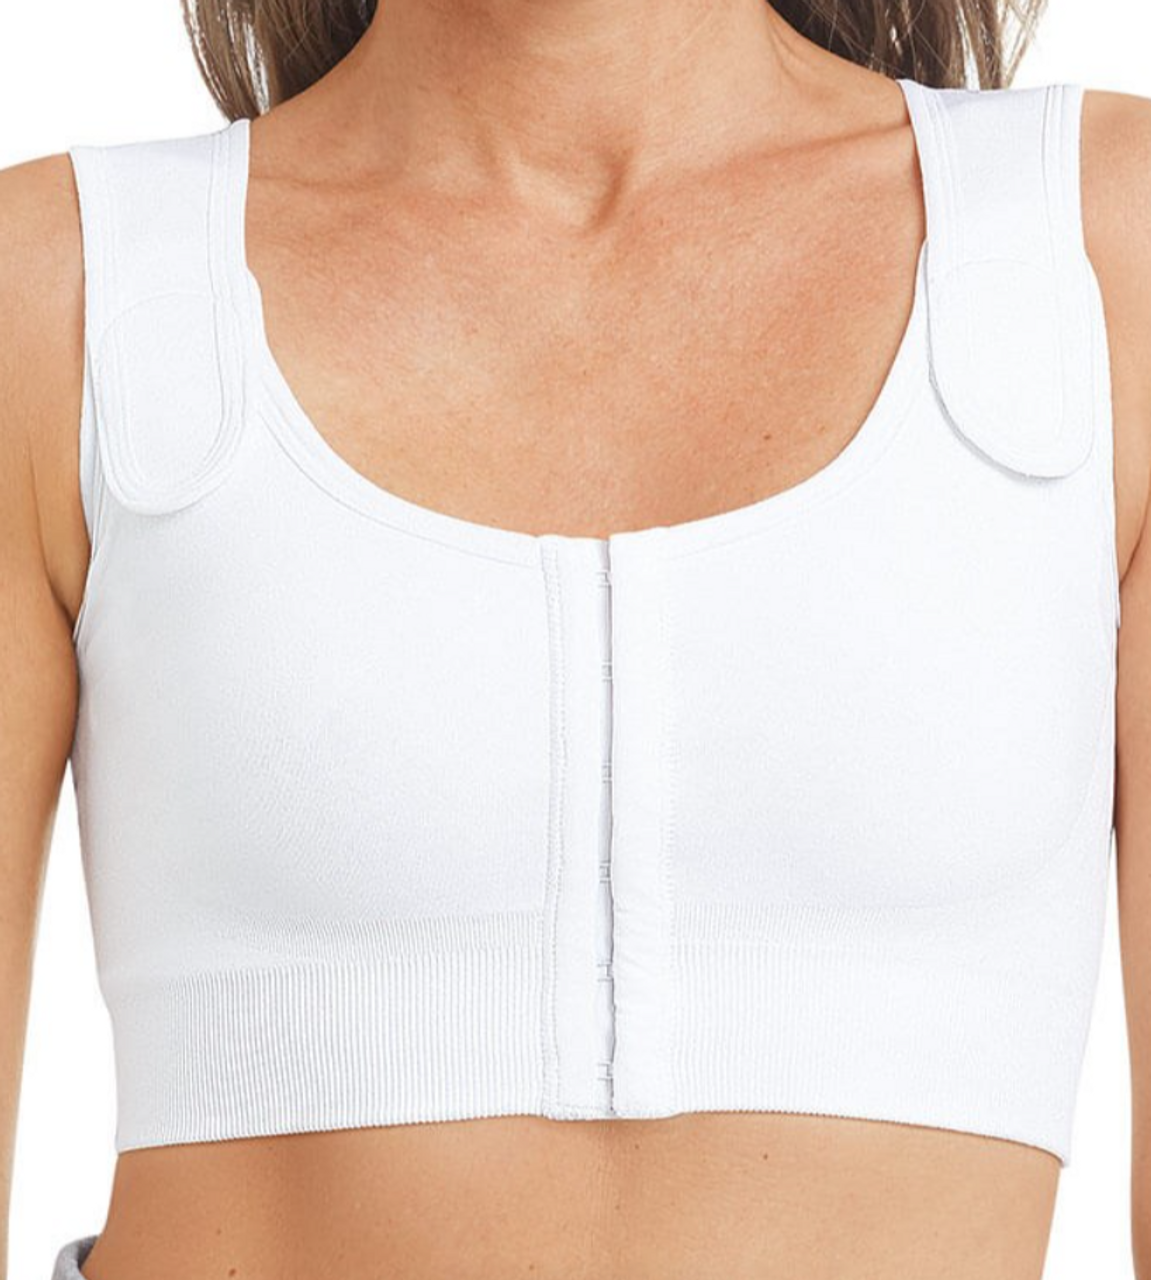 Amoena Michelle Post Surgical Camisole